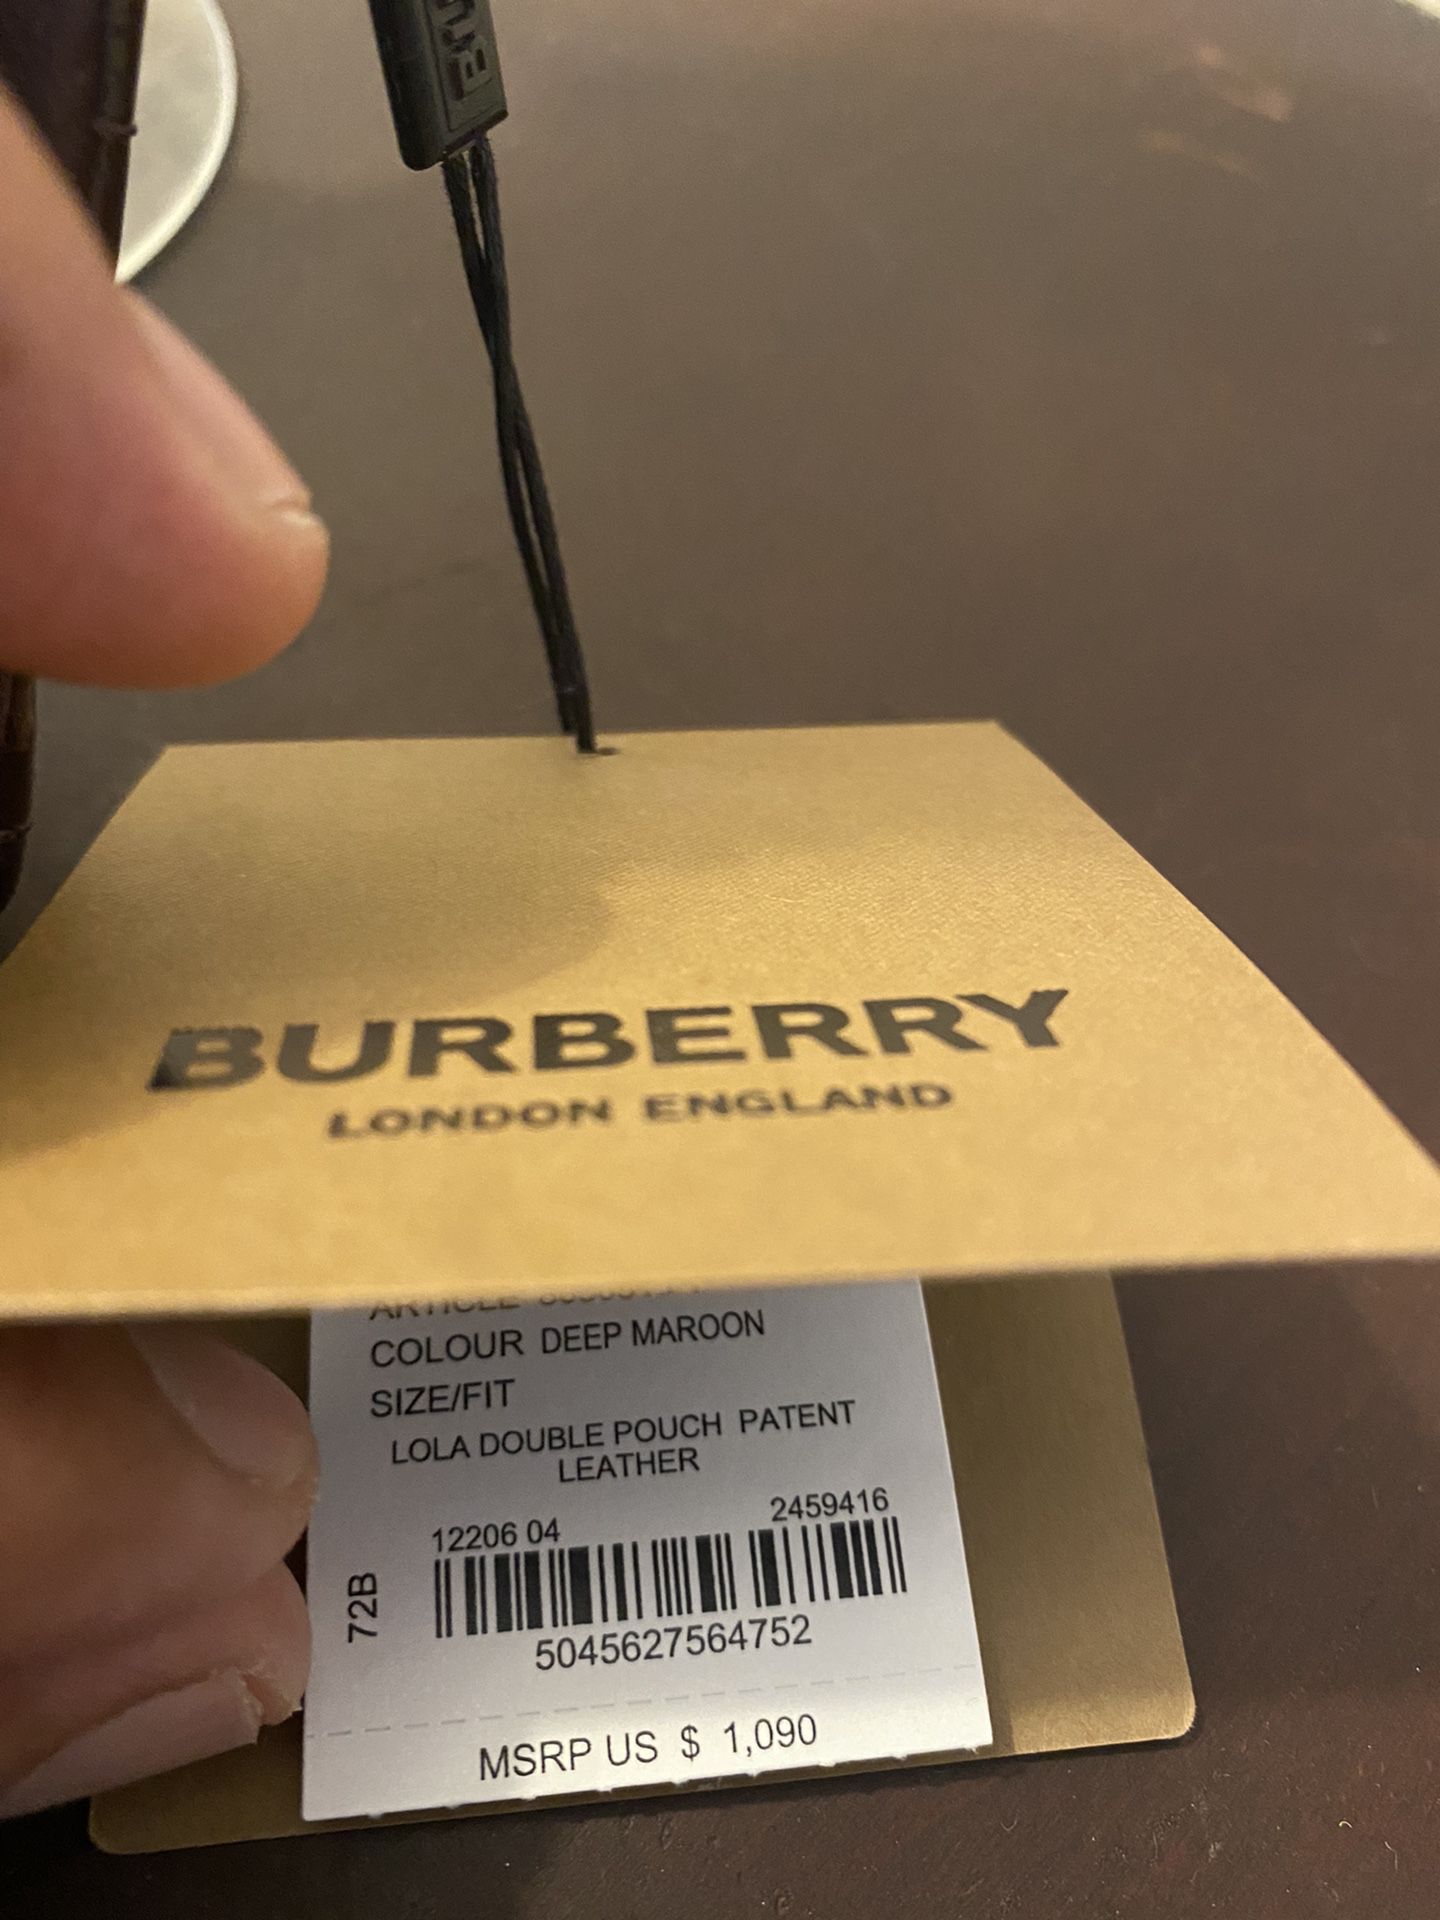 Burberry bags for sale in Tulsa, Oklahoma